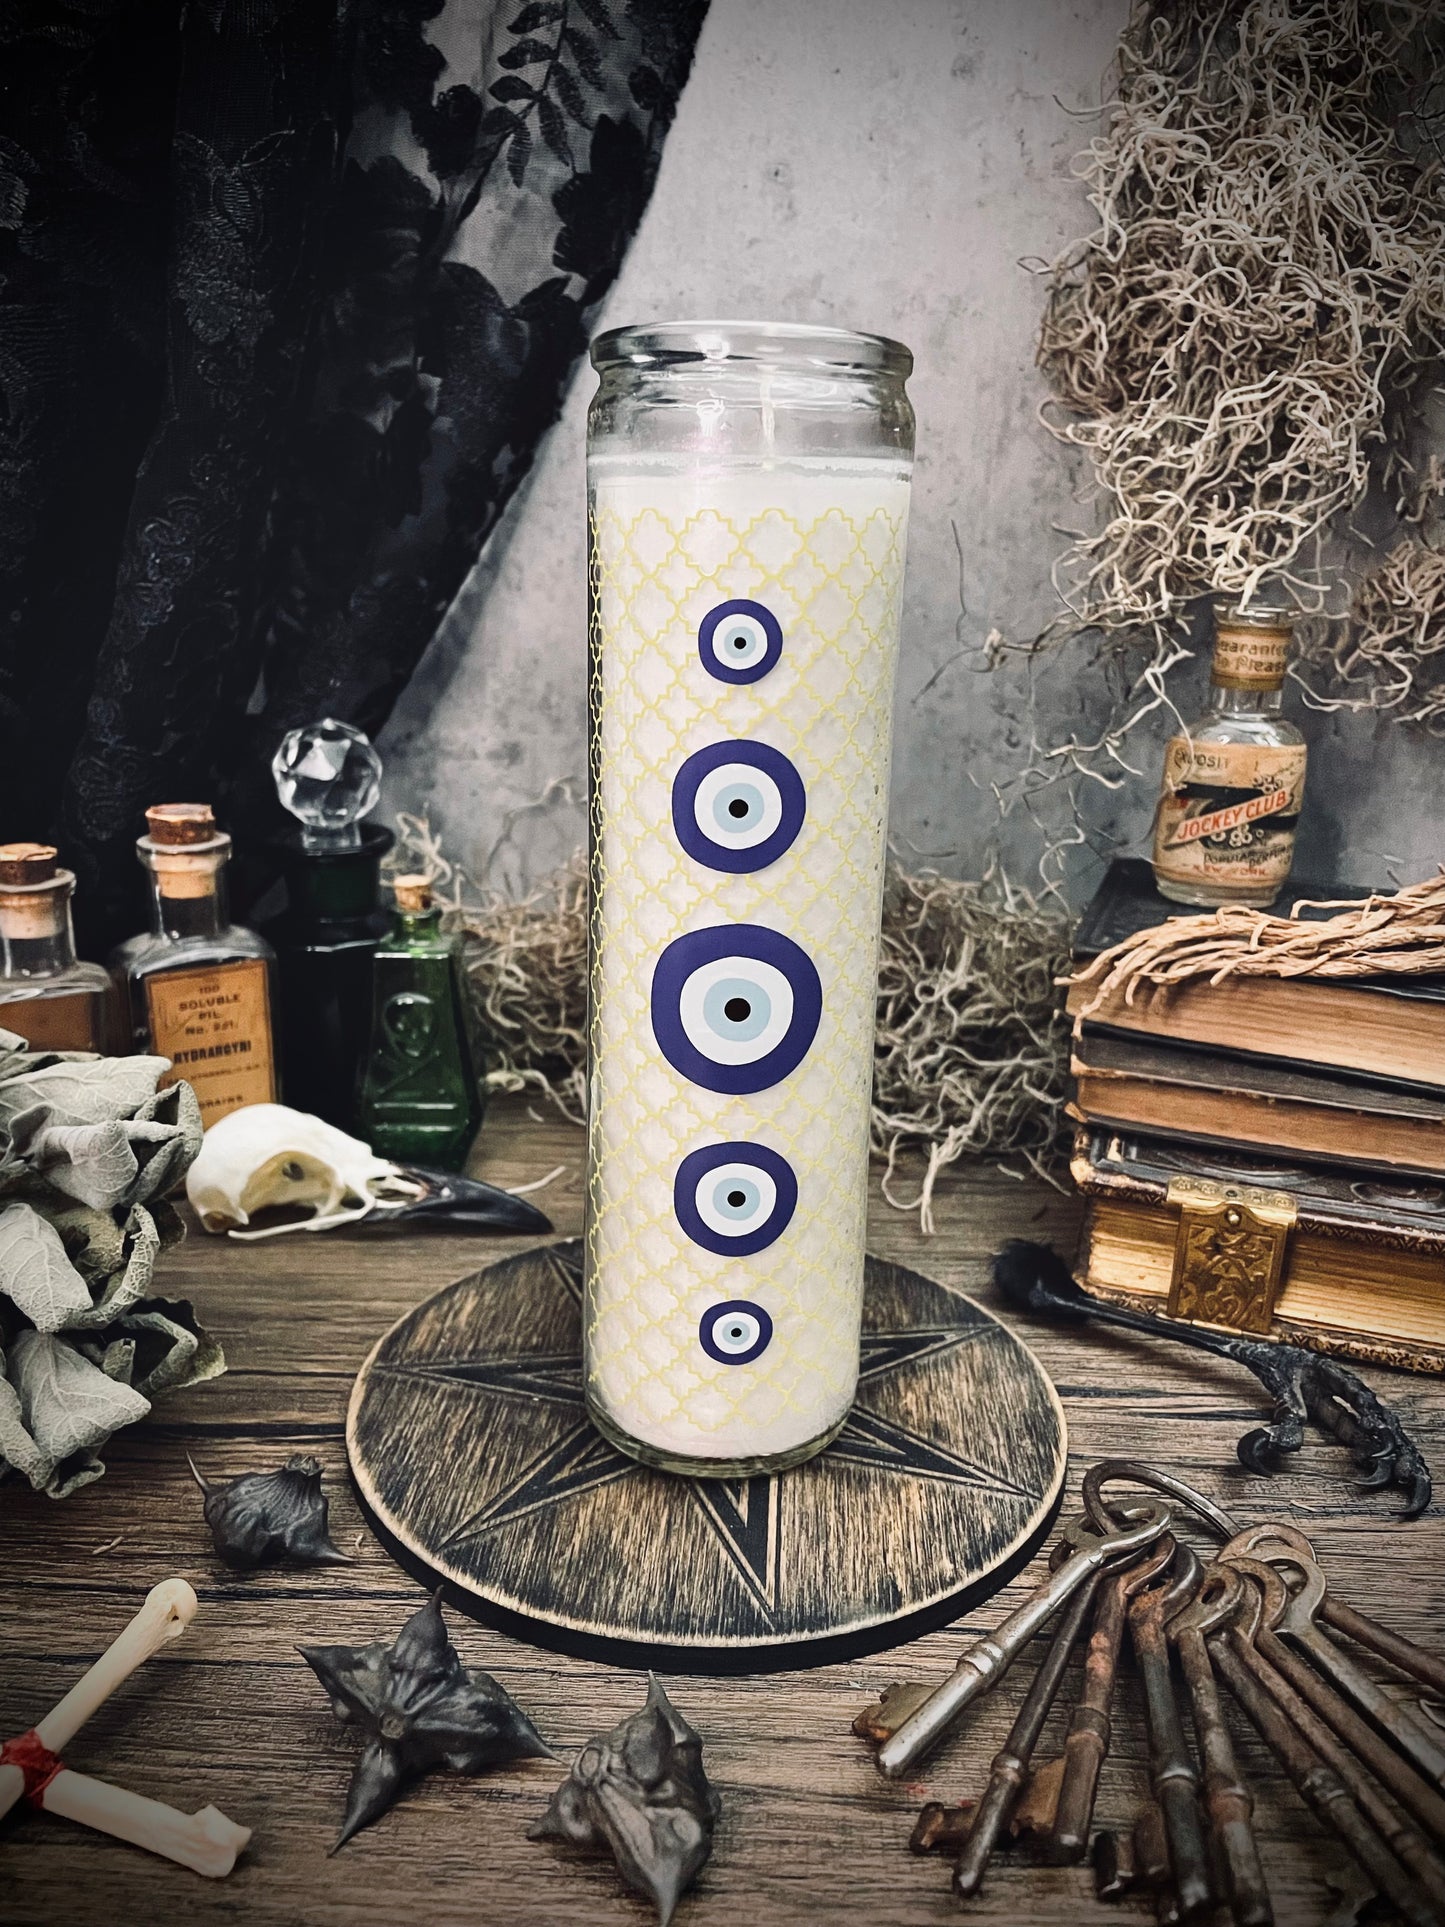 Evil Eye Seven Day Candle